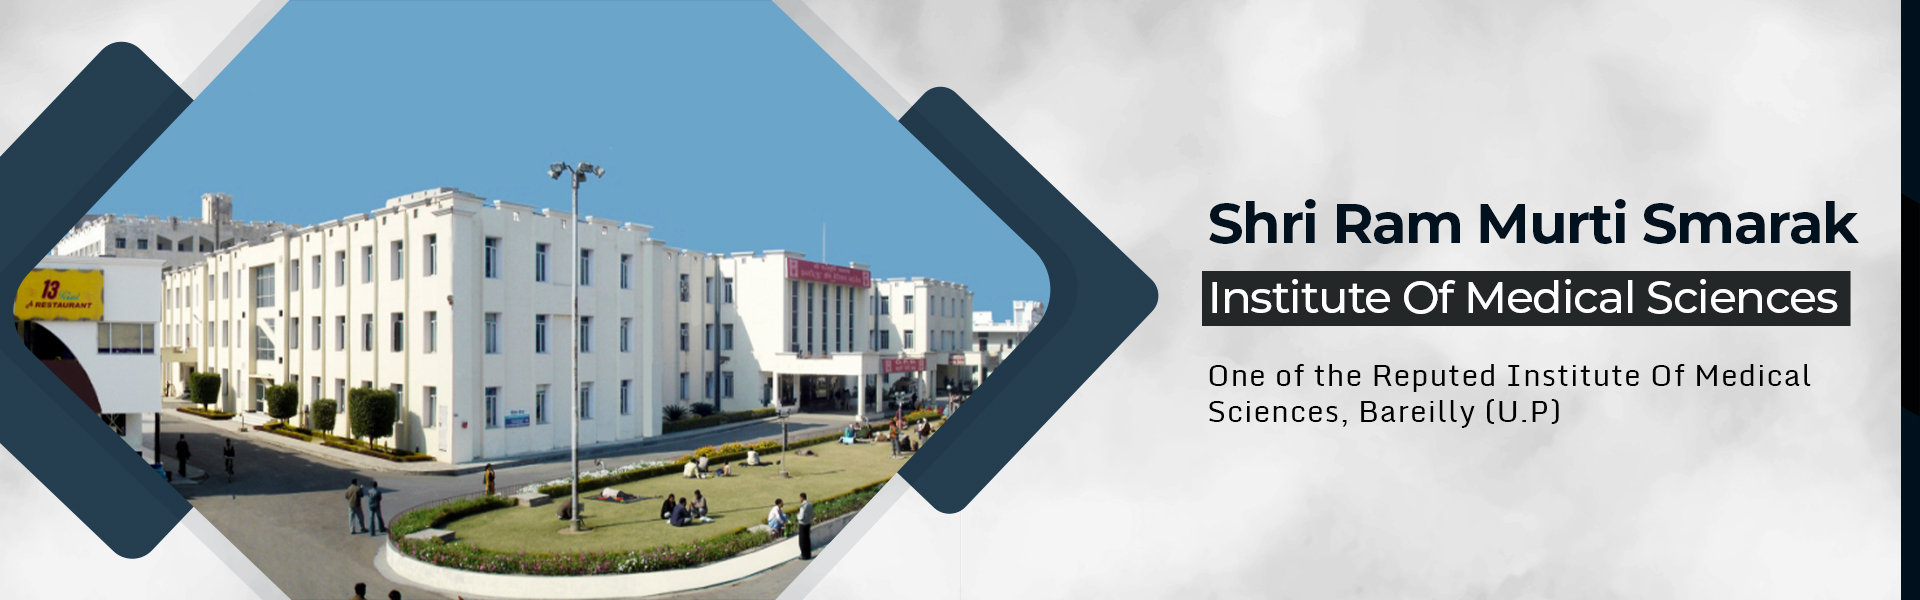 Shri Ram Murti Smarak Institute of Medical Sciences Bareilly 2022-23: Admission, Courses Offered, Fees Structure, Cutoff , Counselling , Contact Details